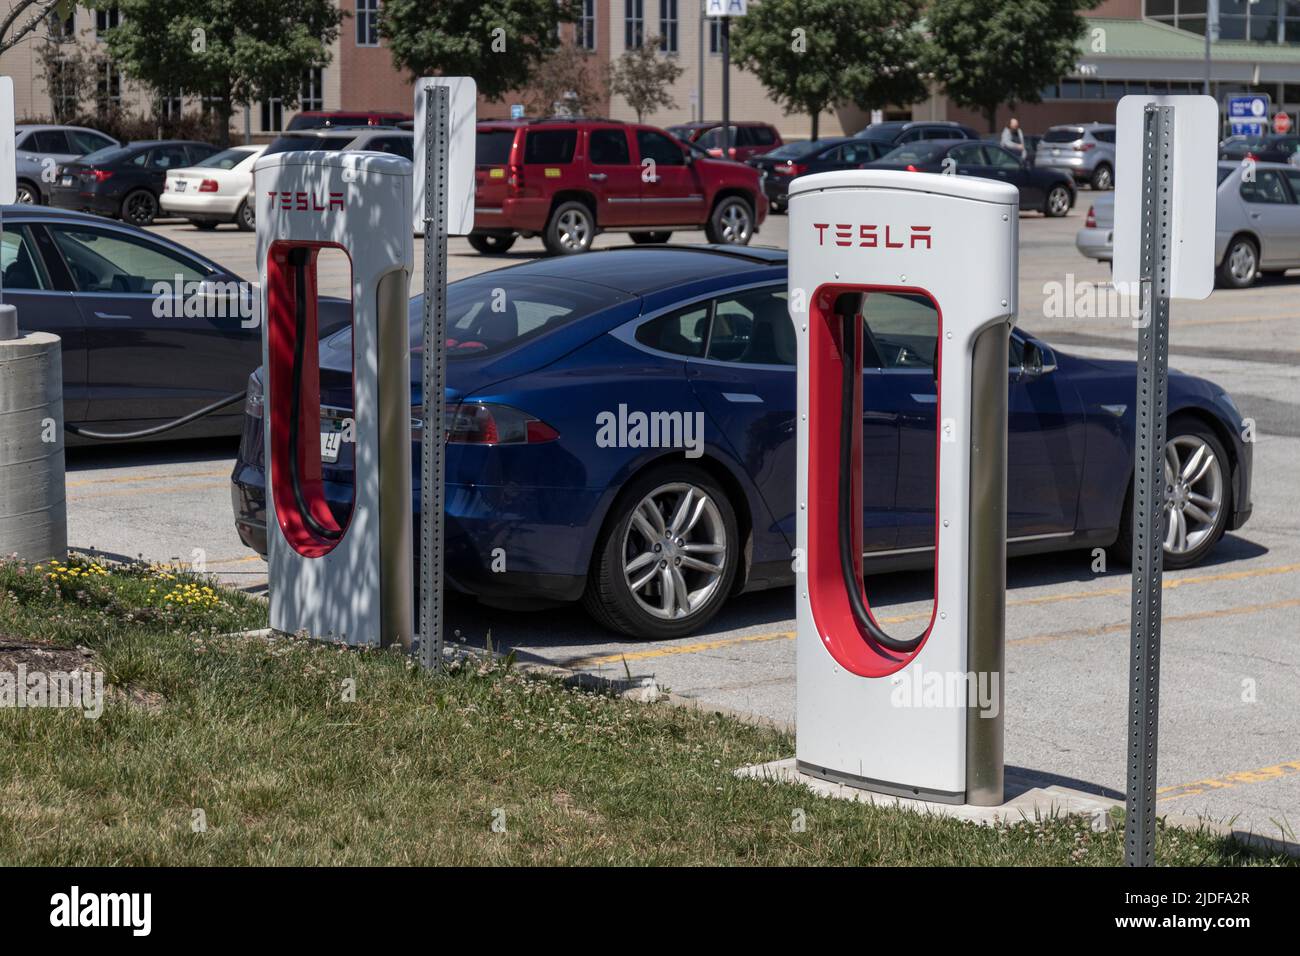 Zionsville - Circa June 2022: Tesla EV electric vehicle charging. Tesla products include electric cars, battery energy storage and solar panels. Stock Photo